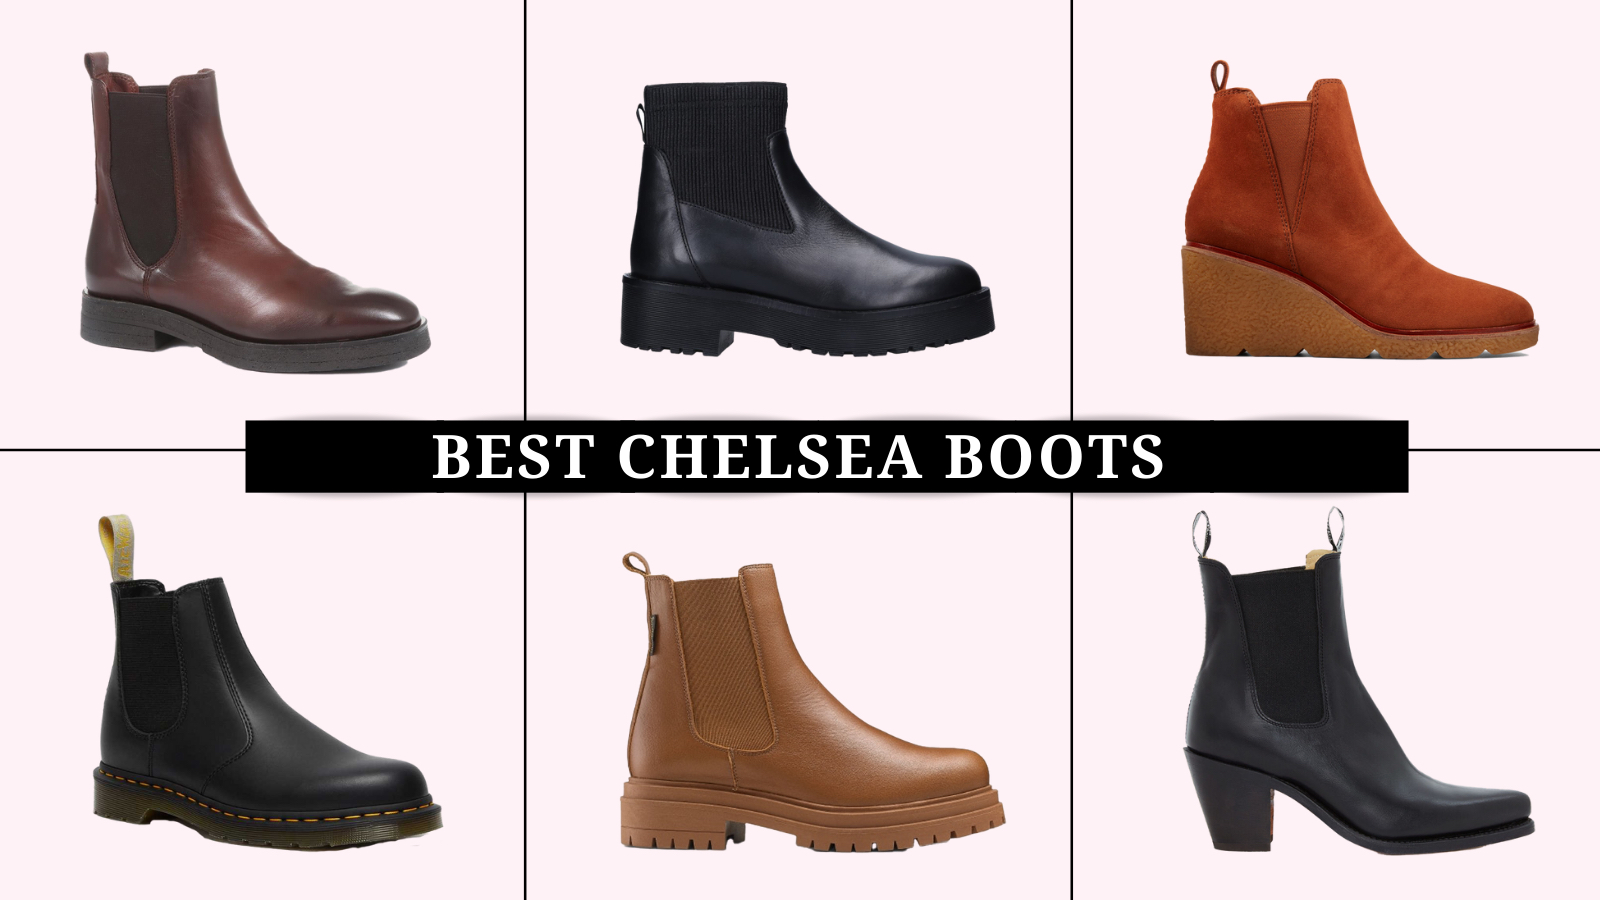 11 best Chelsea boots for fall, according to experts and editors